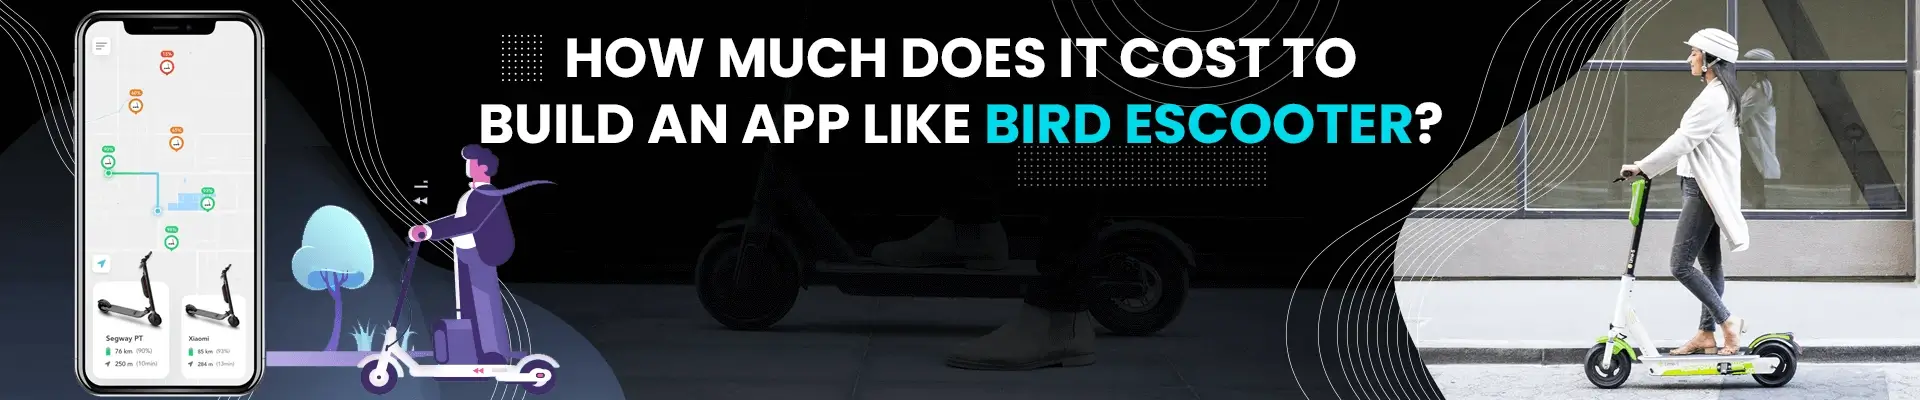 How Much Does It Cost To Develop A Bird EScooter Like App